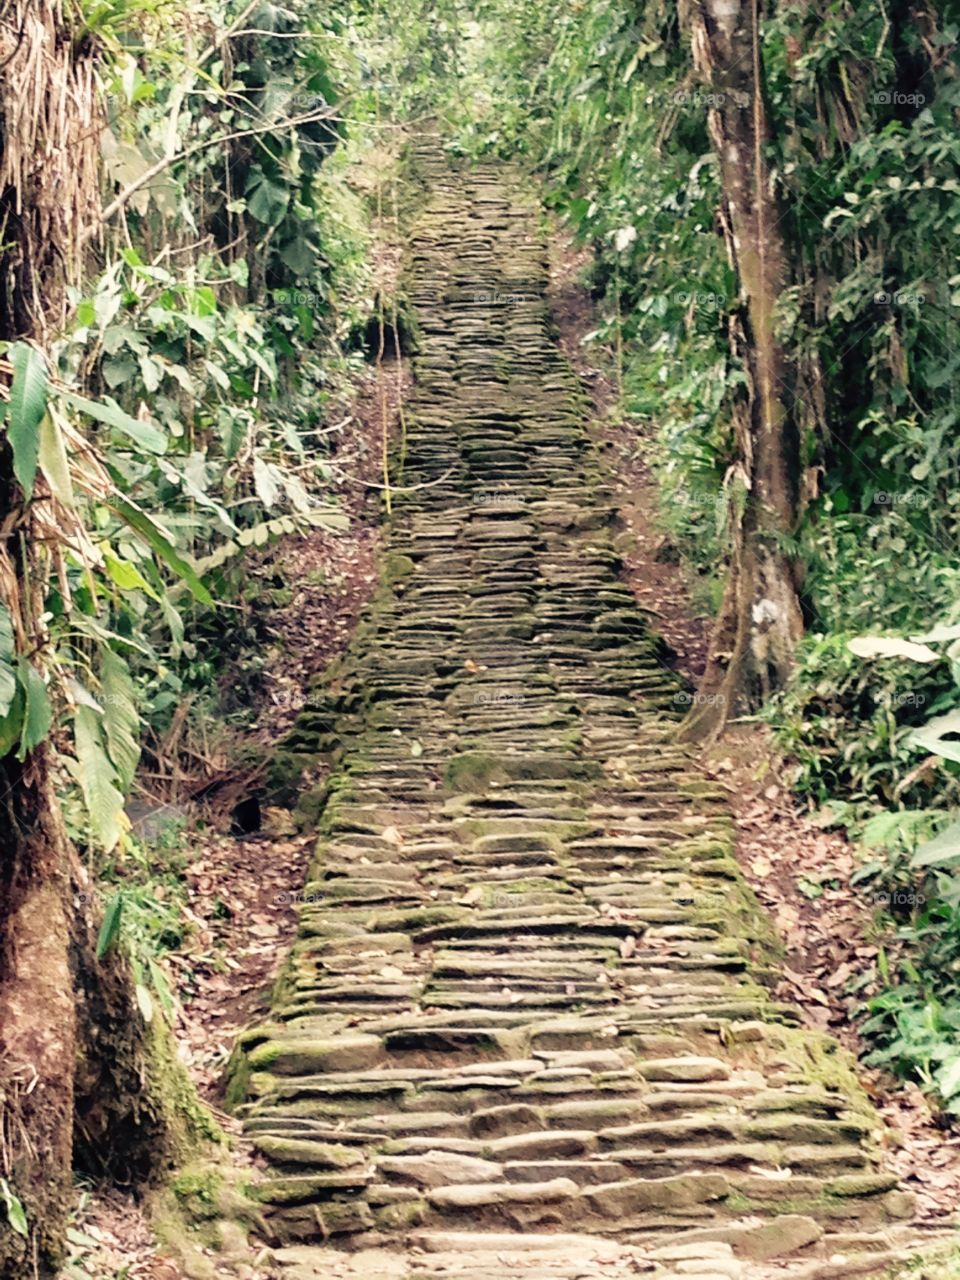 Steps into the Lost City. Hiking through the Colombian jungle for days to get to this moment of the last set of stairs before the main city